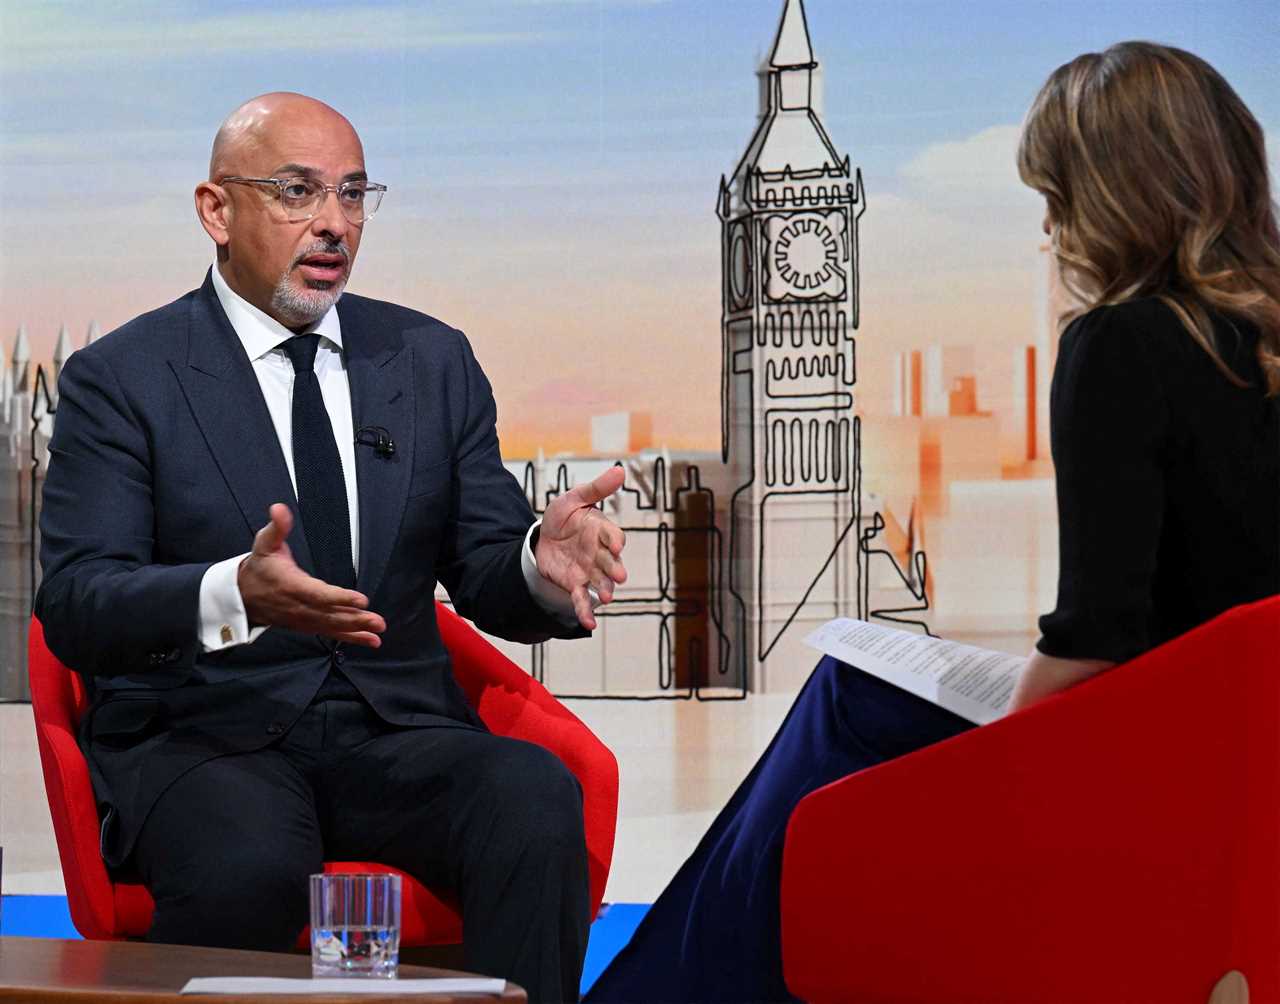 Nadhim Zahawi blocked from getting Knighthood after officials raised questions about tax affairs